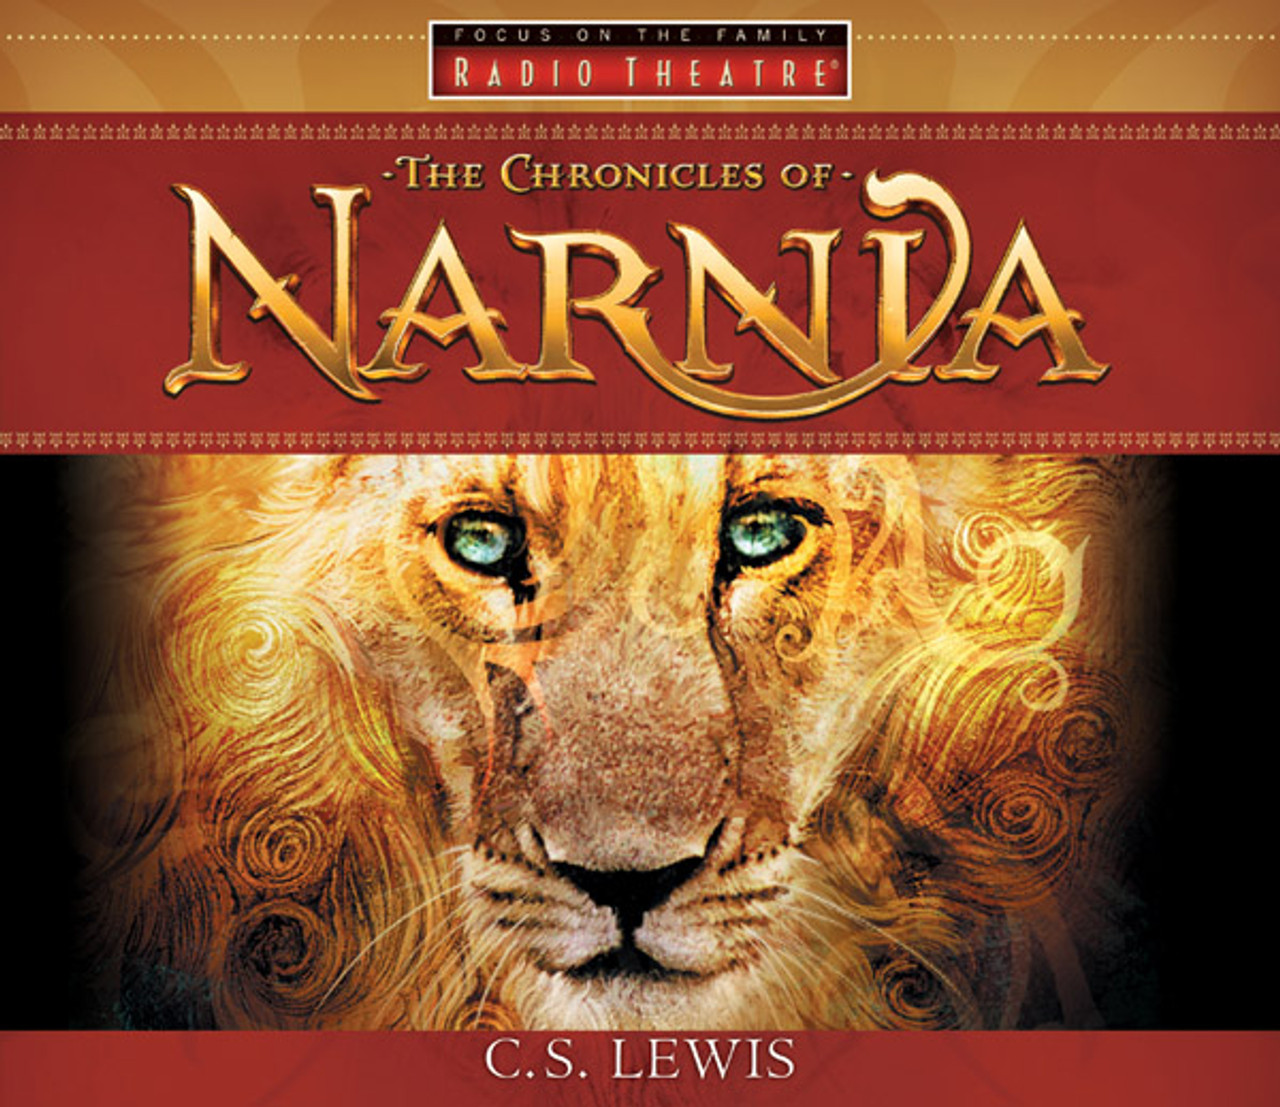 Download Xxx Boy And Girl Full Video Mp3 - Radio Theatre: The Chronicles of Narnia Complete Set (Digital Audio Download)  - Store | Focus on the Family